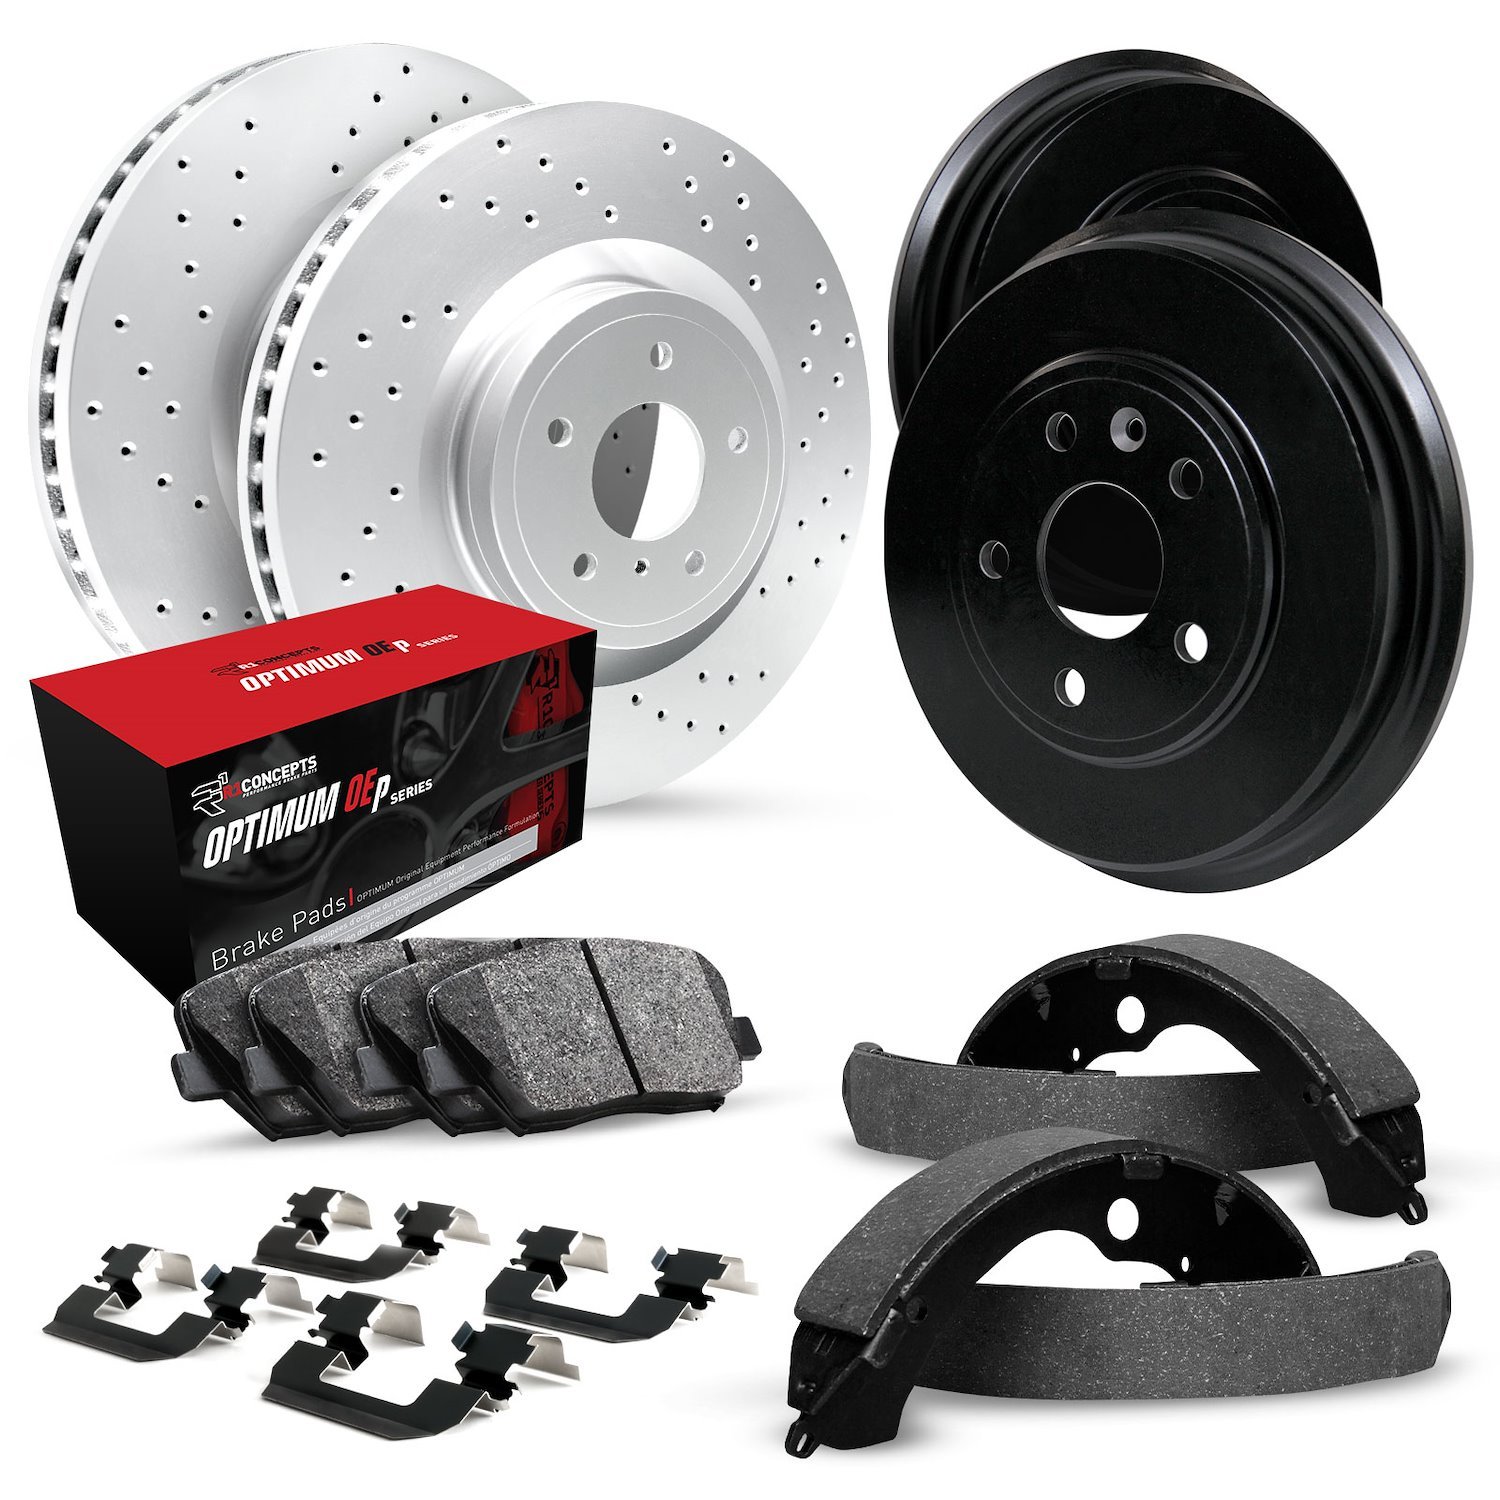 GEO-Carbon Drilled Brake Rotor & Drum Set w/Optimum OE Pads, Shoes, & Hardware, 1998-2000 GM, Position: Front & Rear